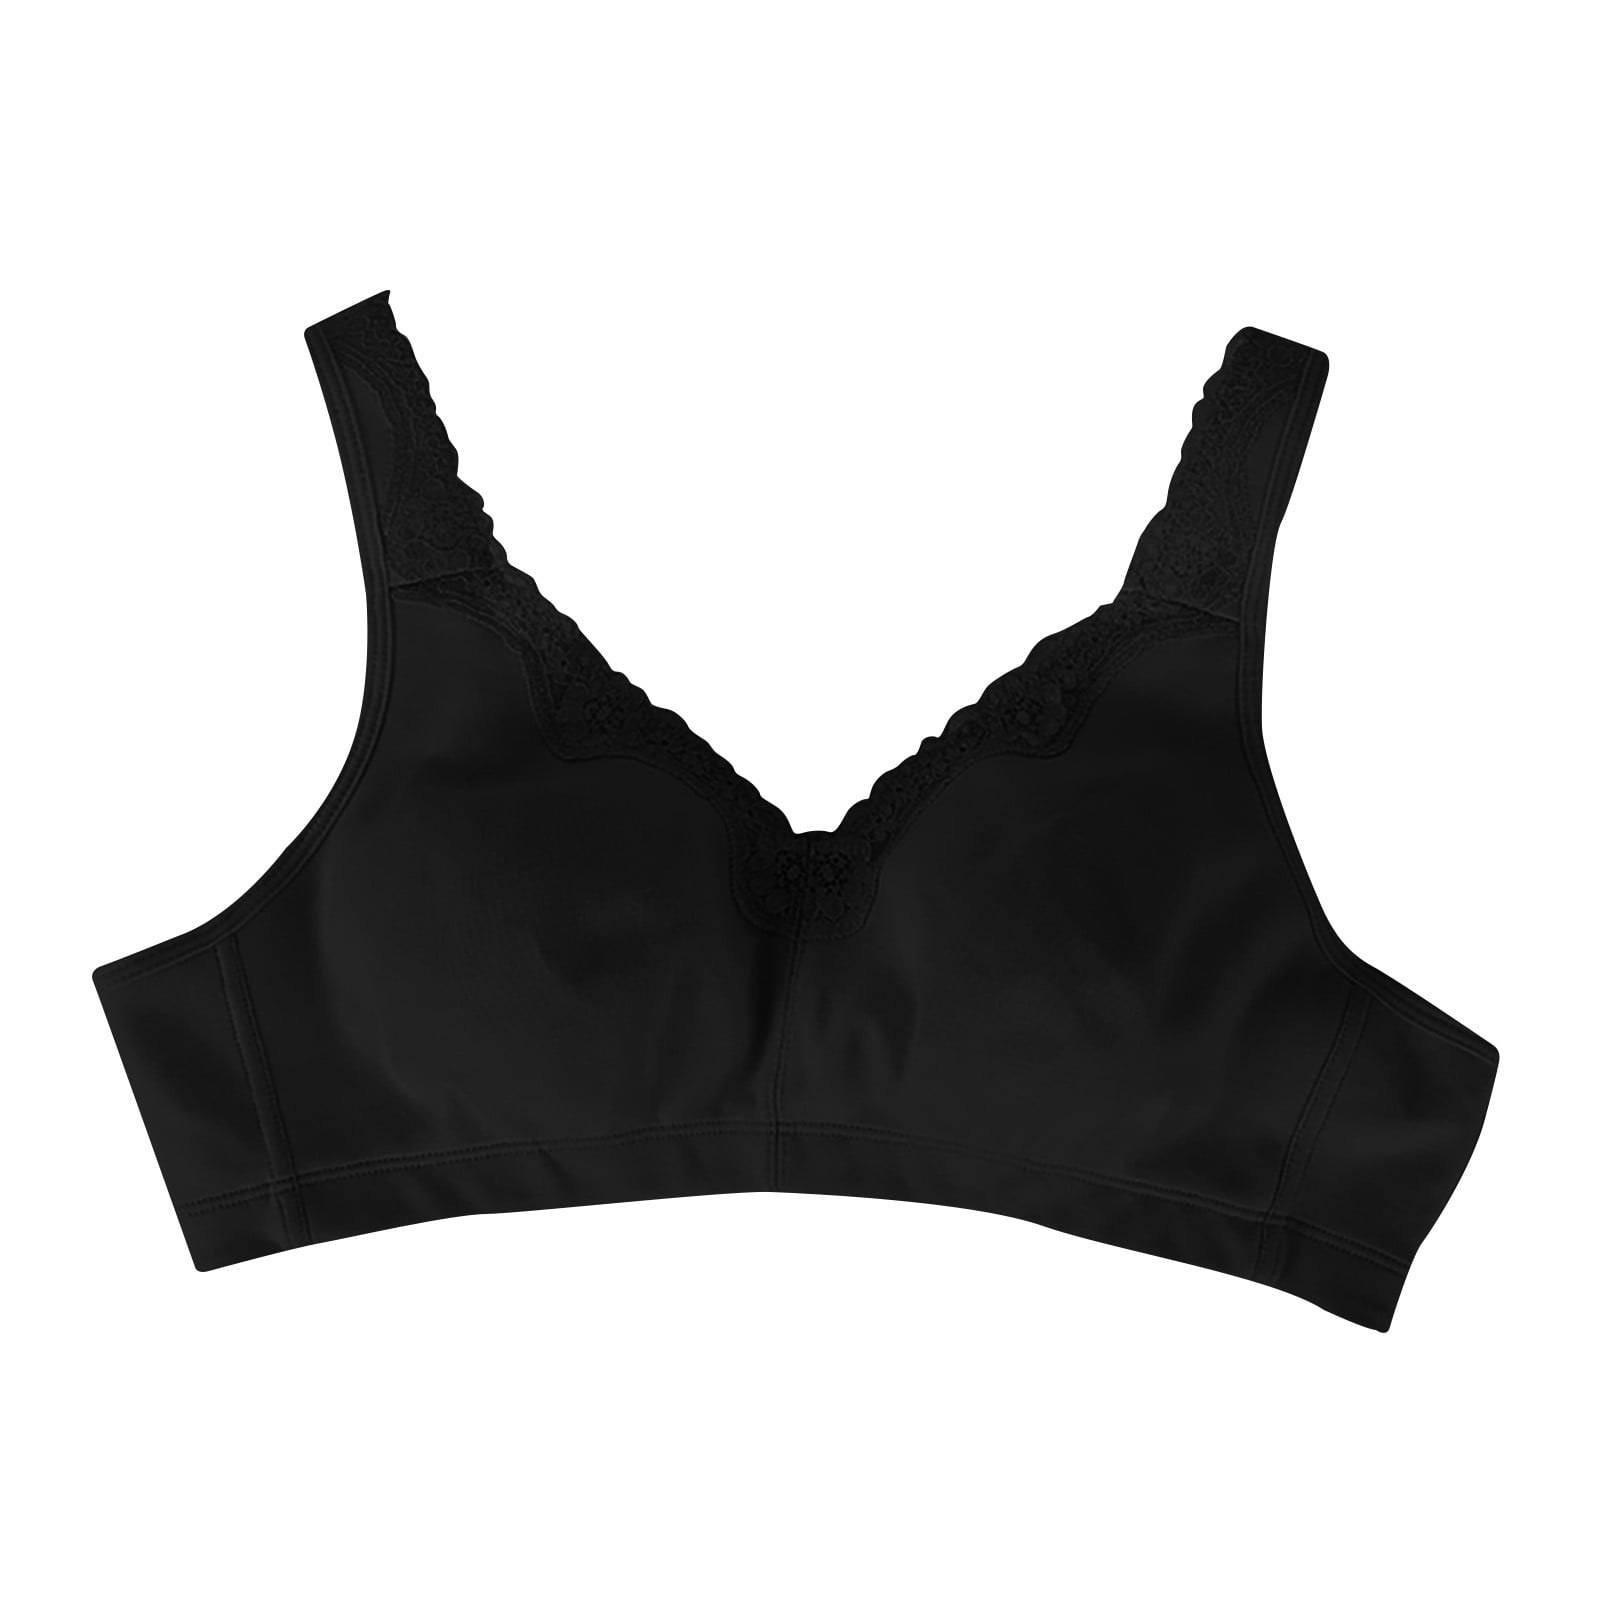 Everyday Bras For Women's Large Breathable, Sweat-absorbing